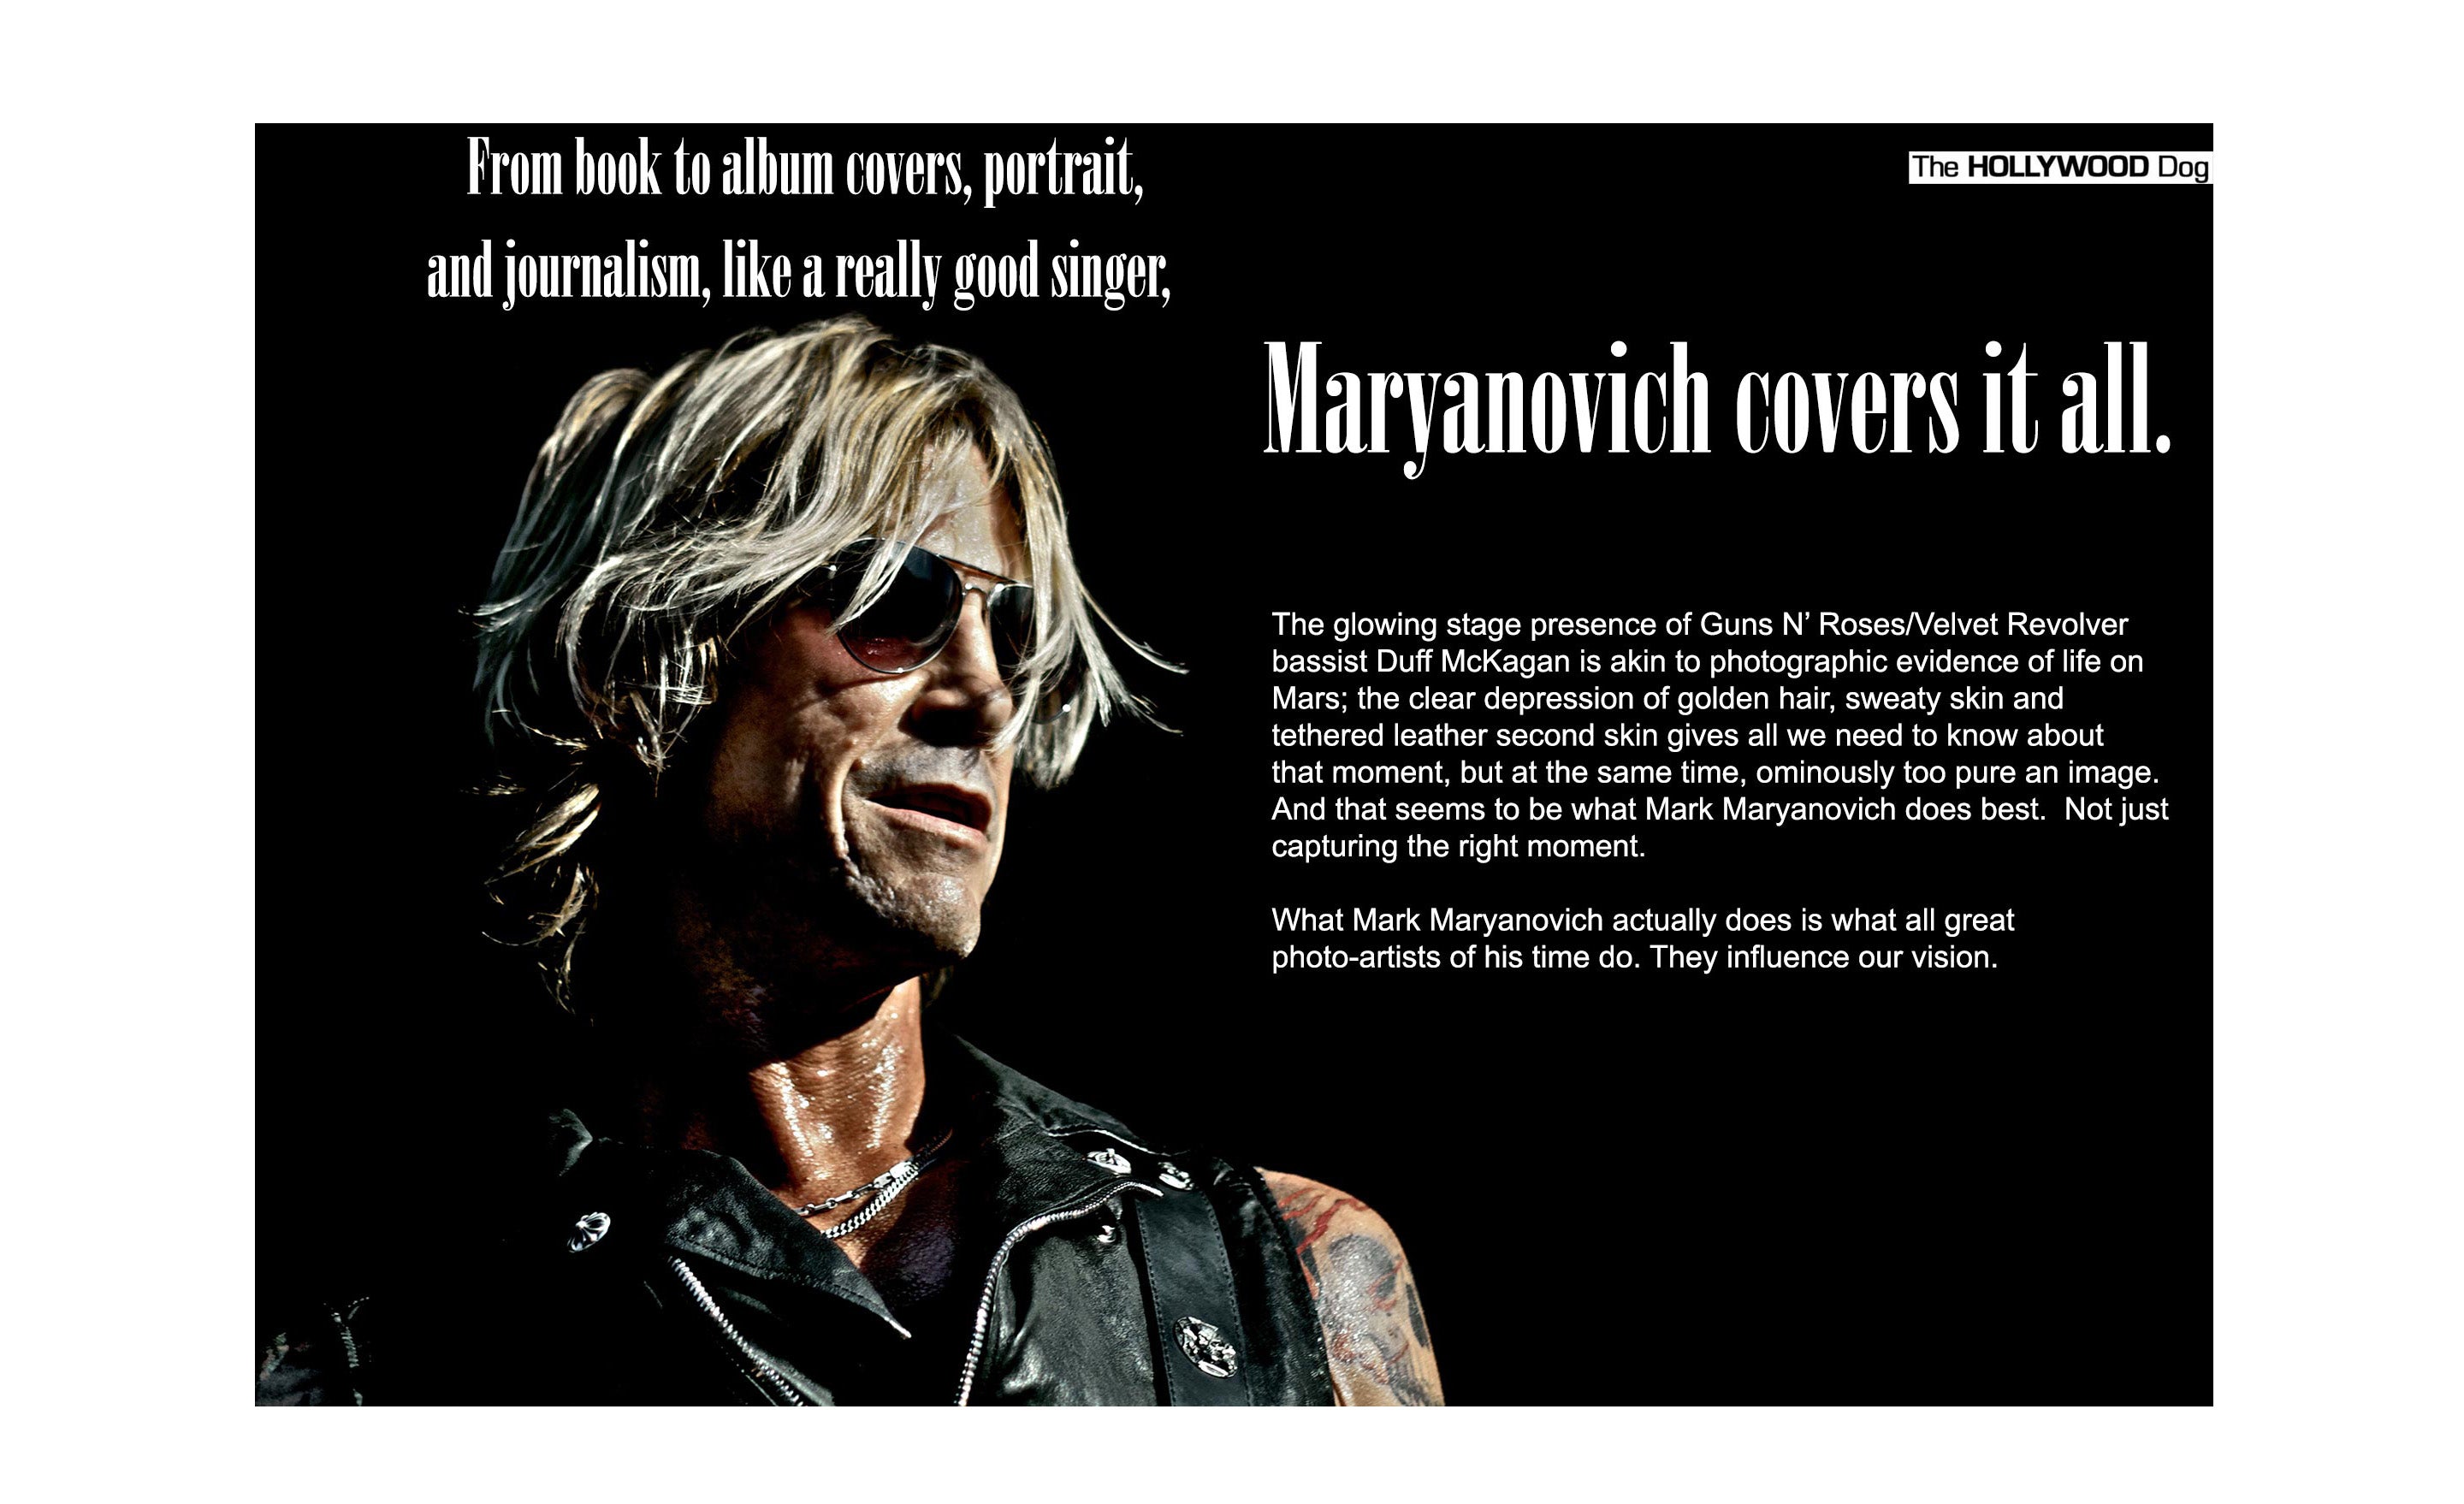 Duff McKagan portrait featured in The Hollywood Dog article about Mark Maryanovich Photography page 4 closeup Guns N Roses bassist wearing black leather vest and sunglasses with text overlaid